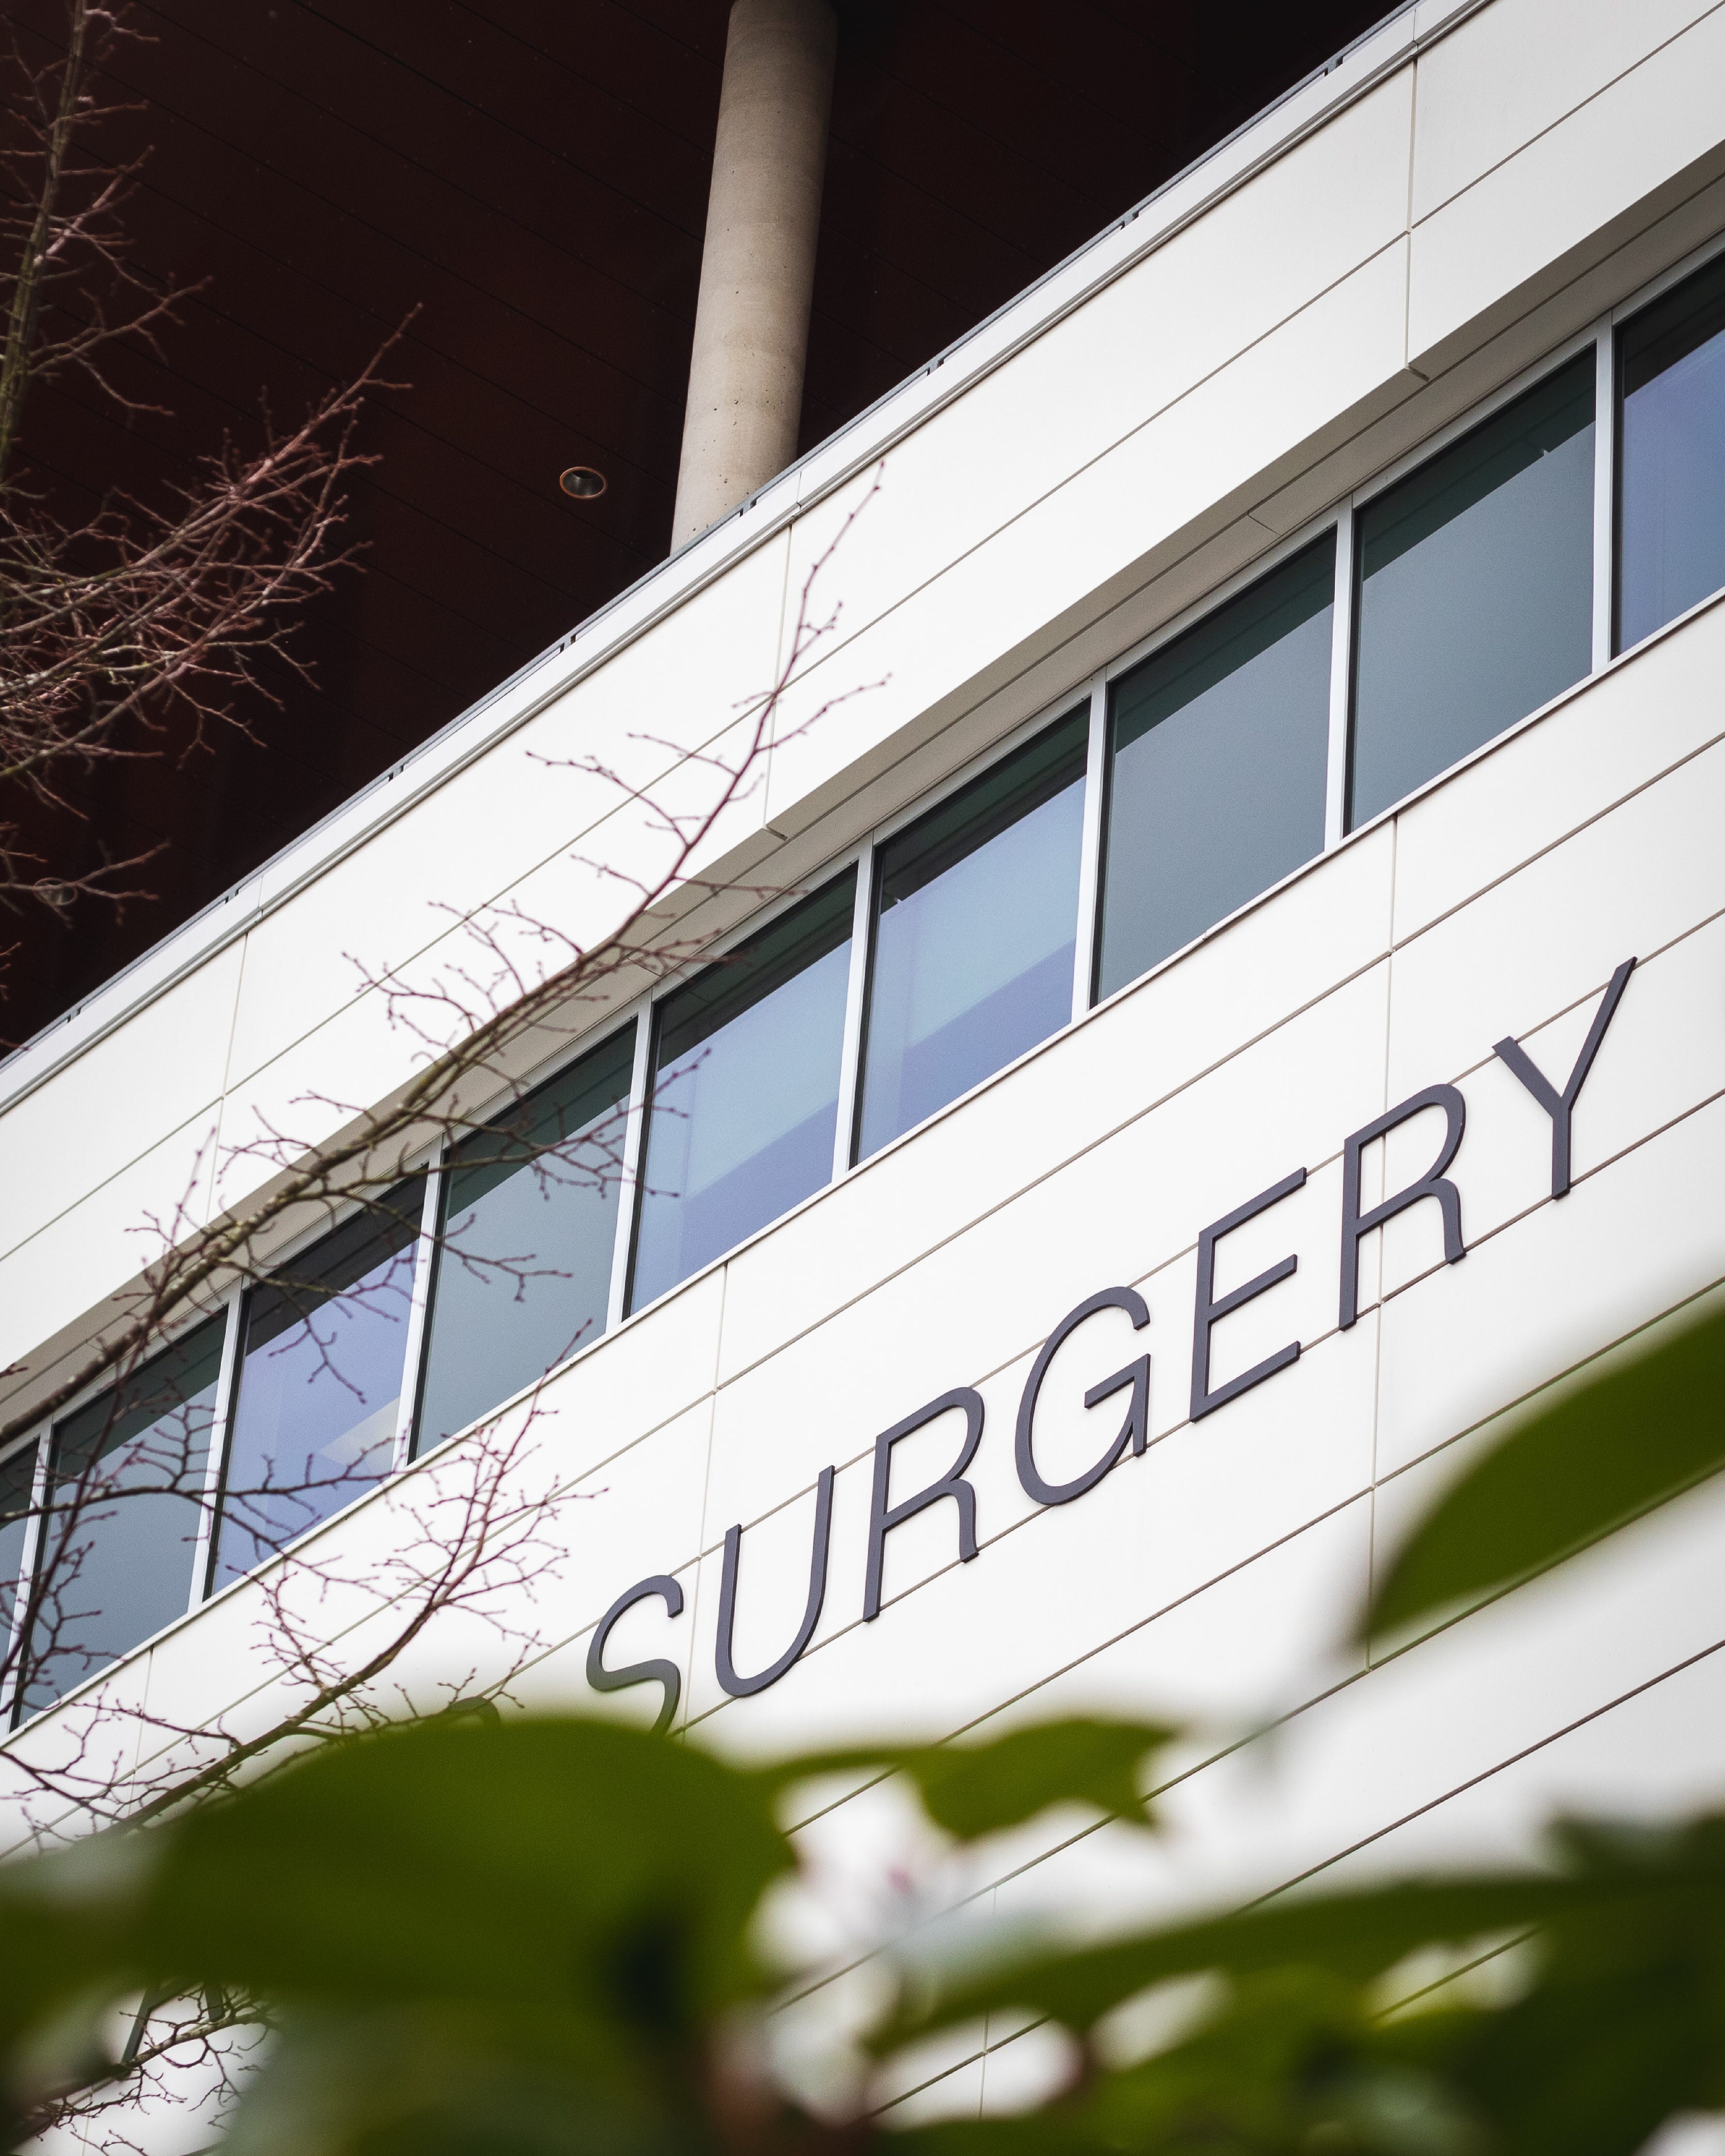 Plastic Surgeons welcome Ahpra review into Cosmetic Surgery regulation